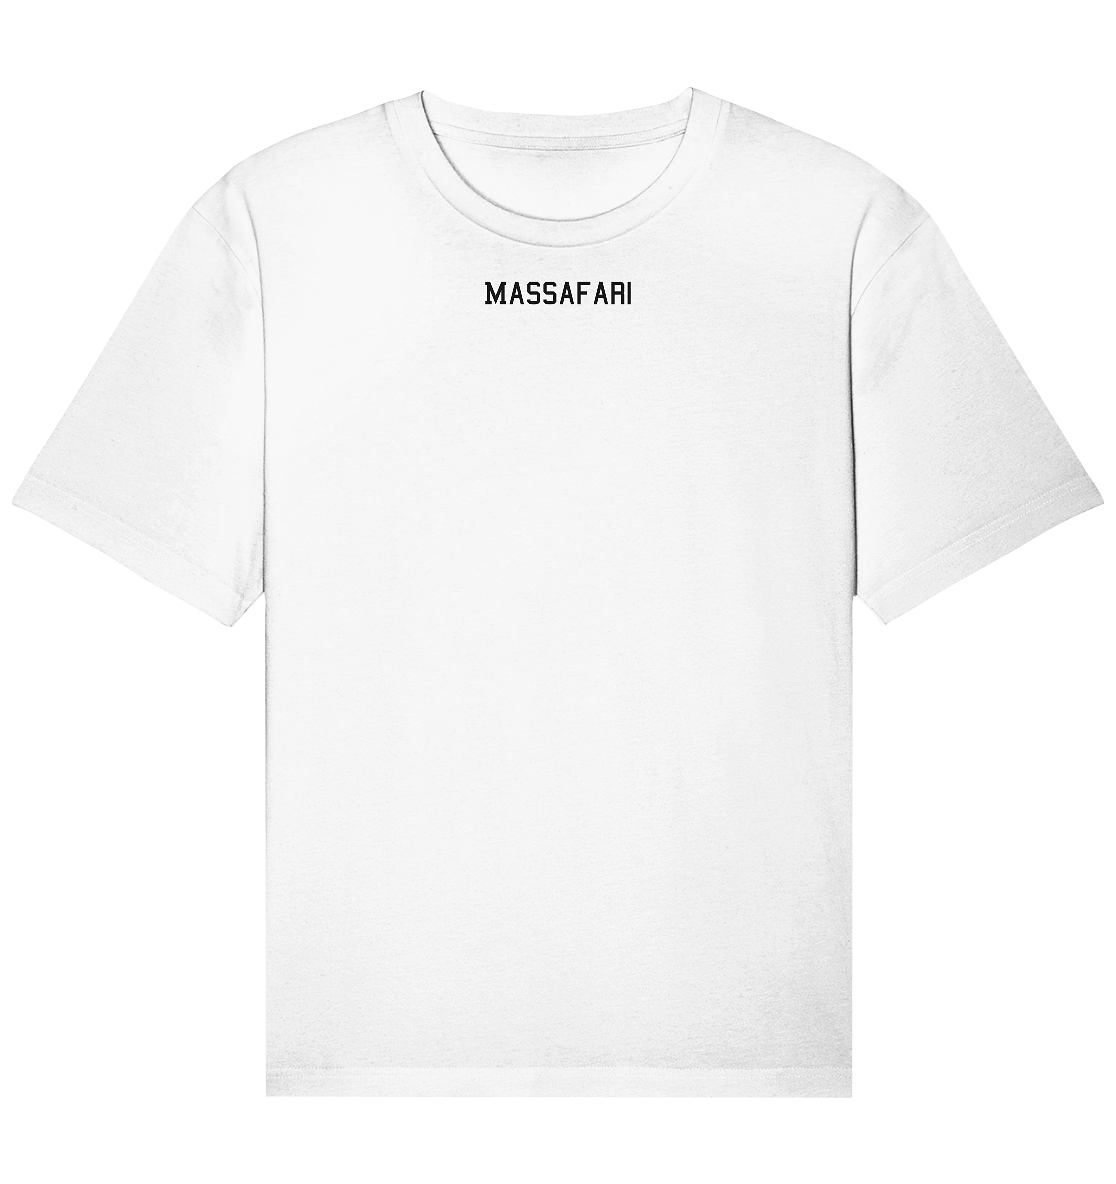 front-organic-relaxed-shirt-f8f8f8-1116x-9.png